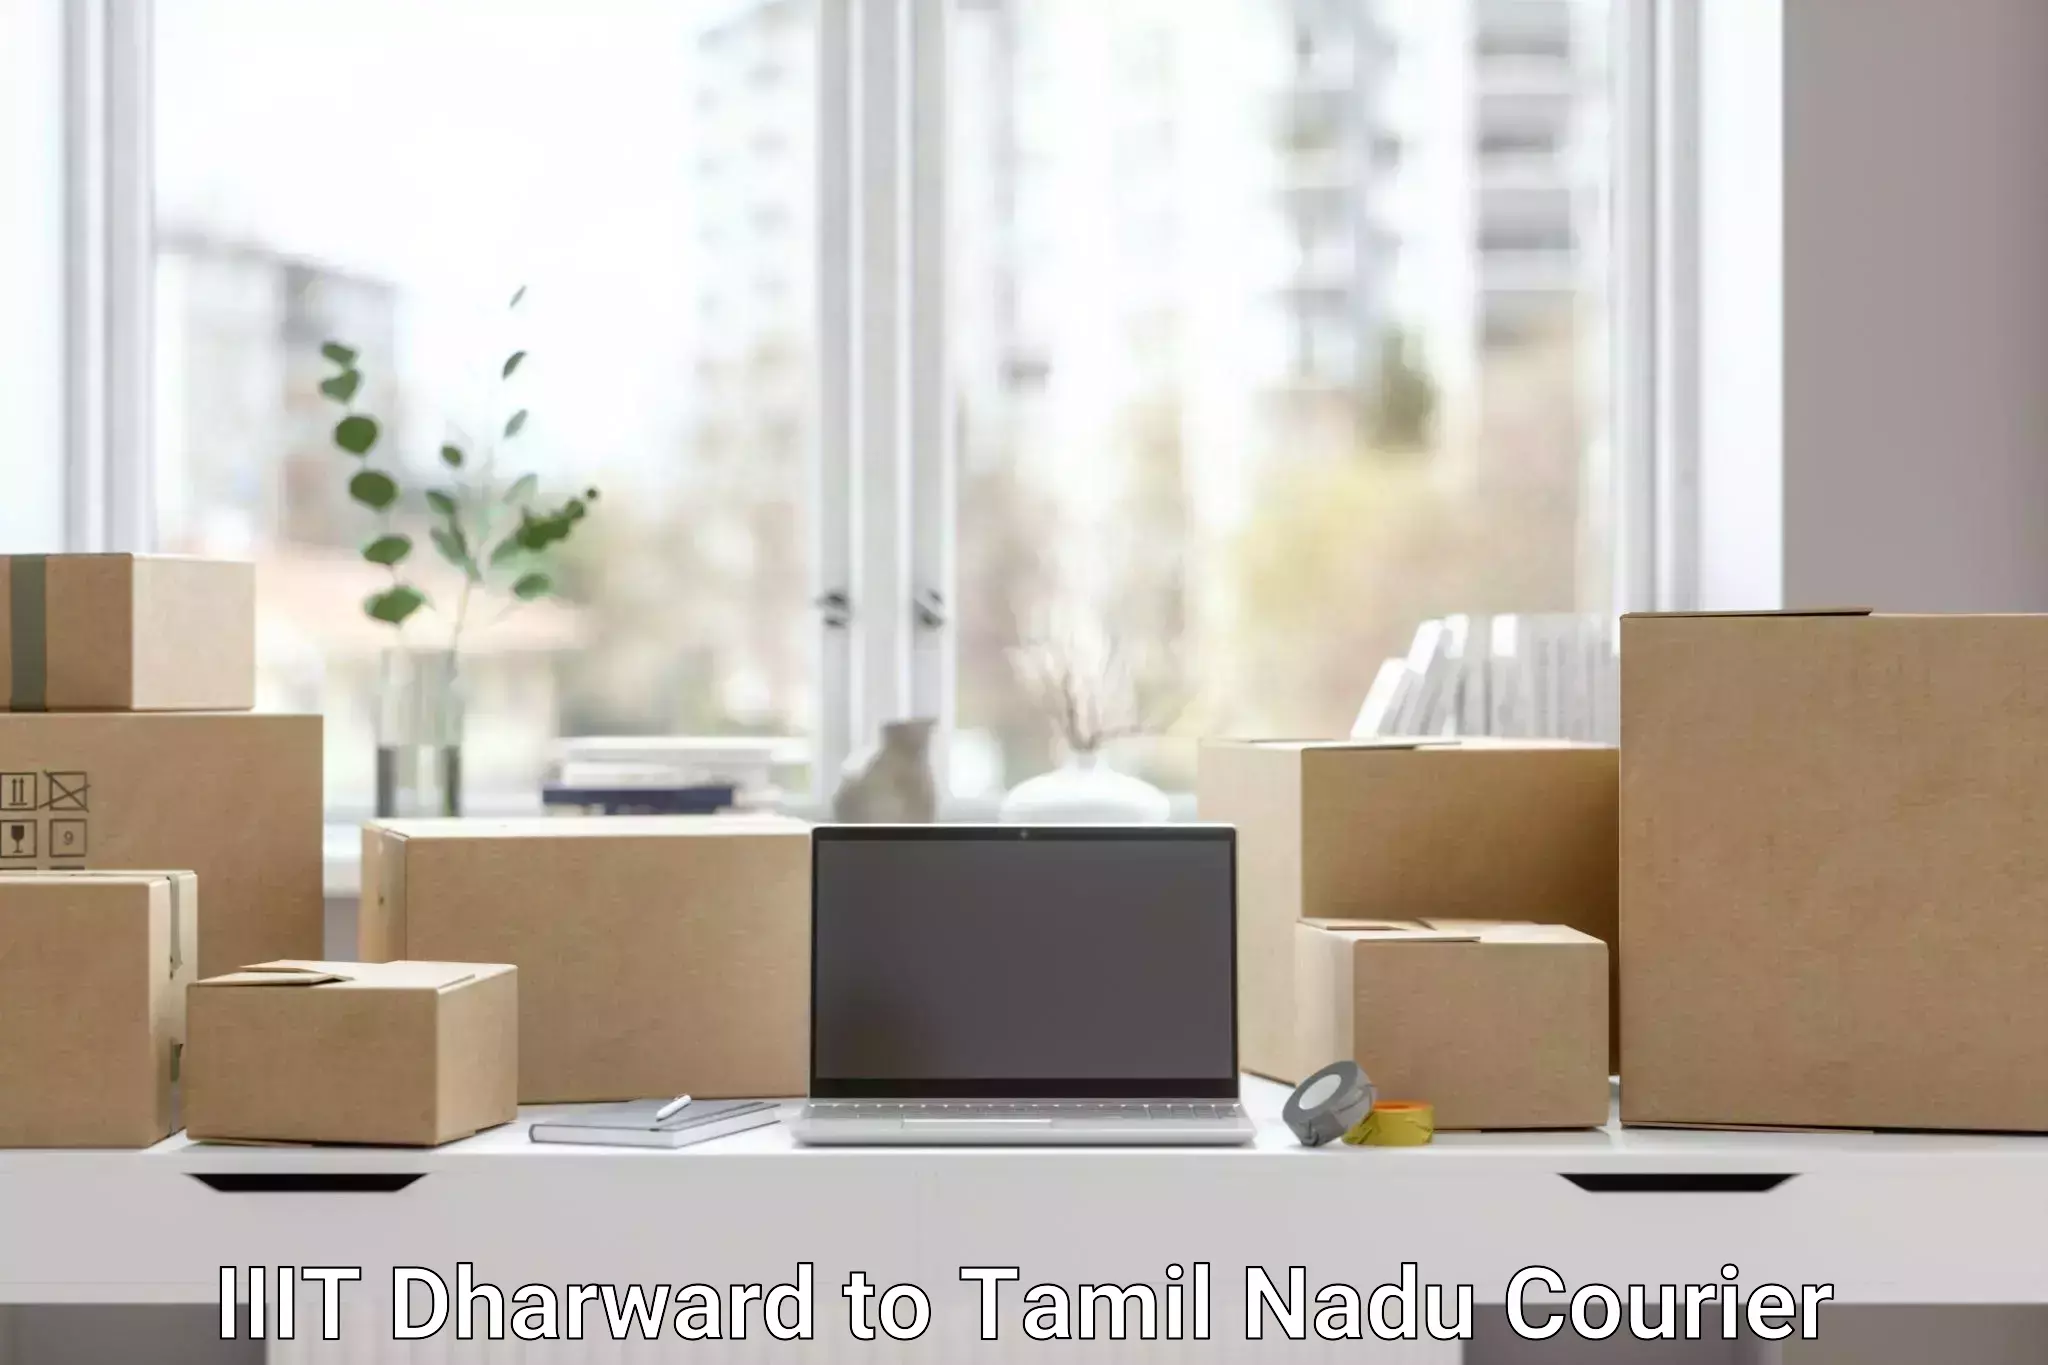 Parcel service for businesses IIIT Dharward to Uthangarai